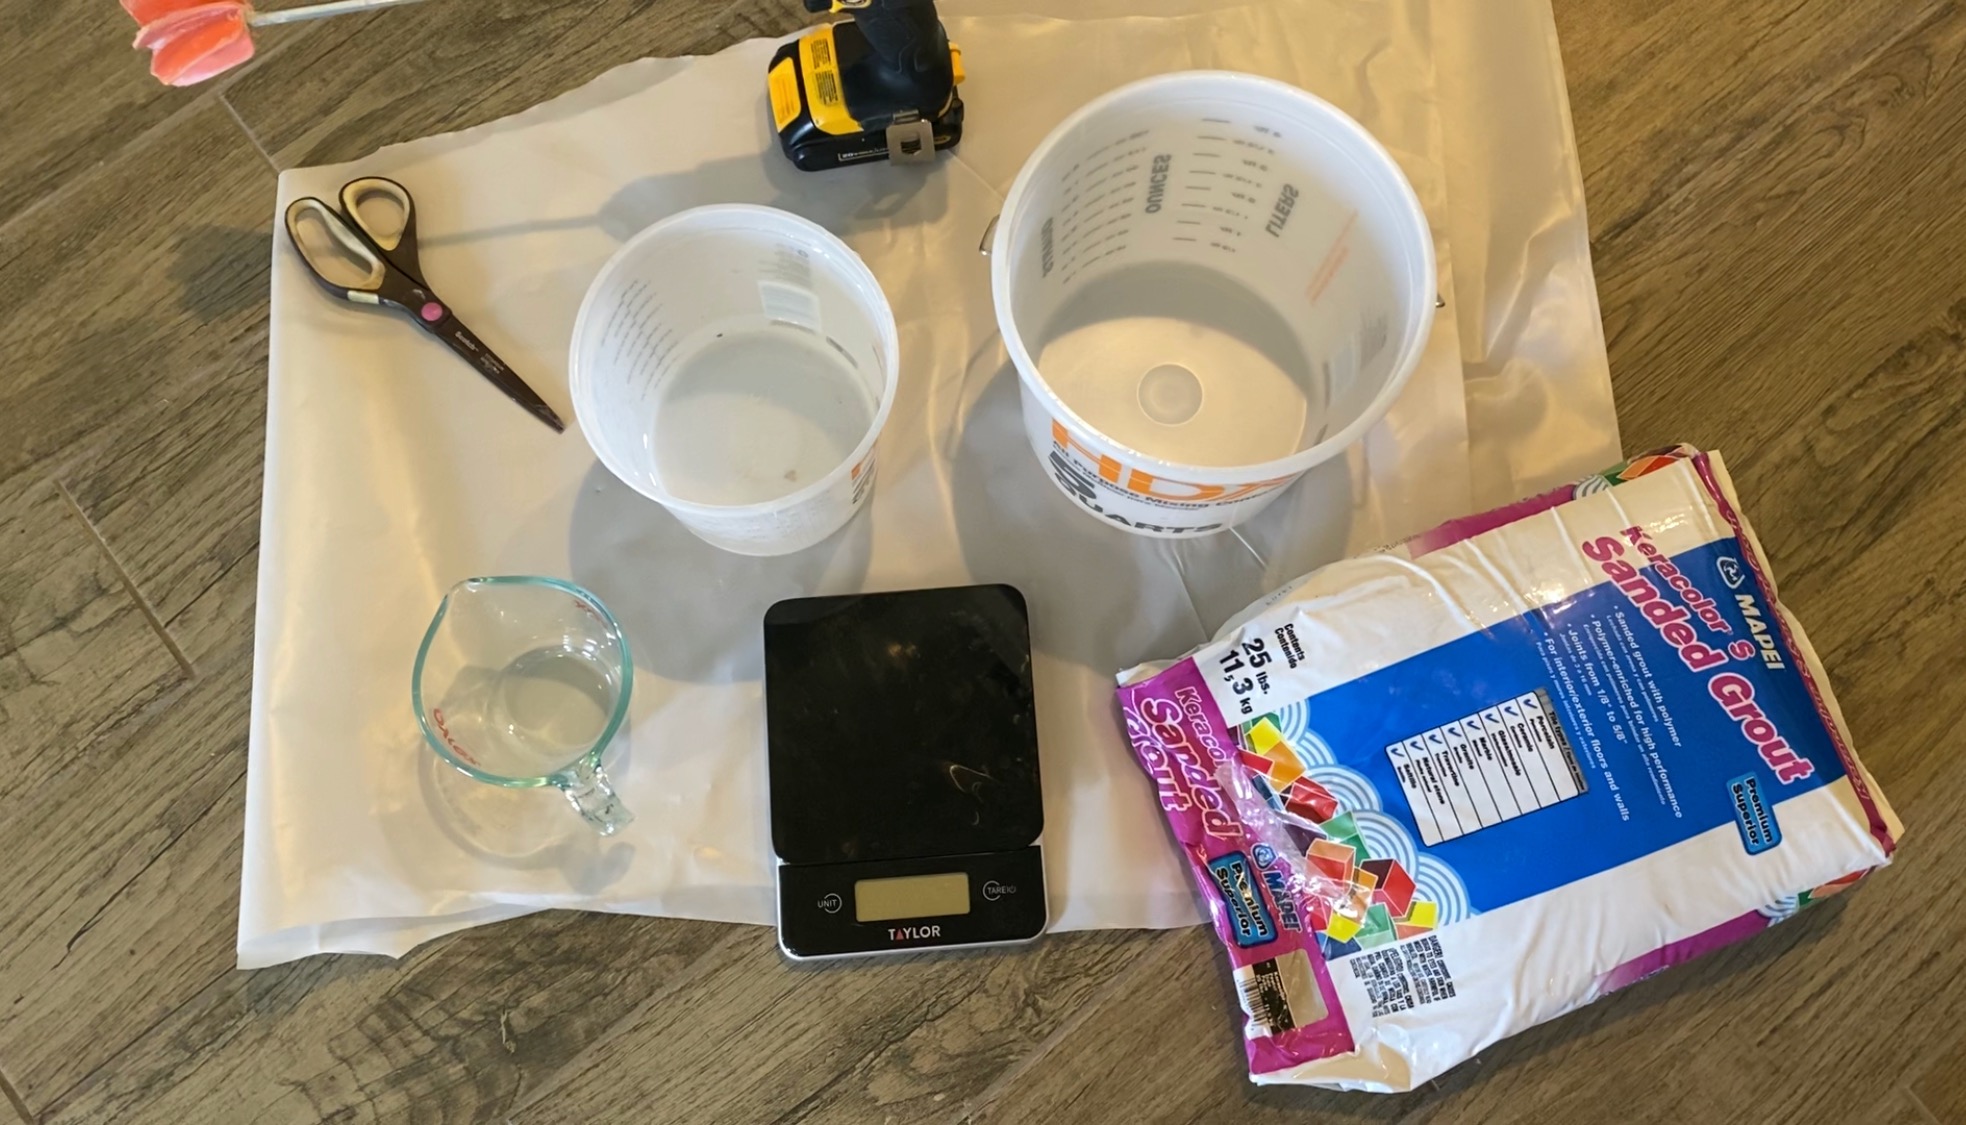 All supplies needed for tiling for a beginner